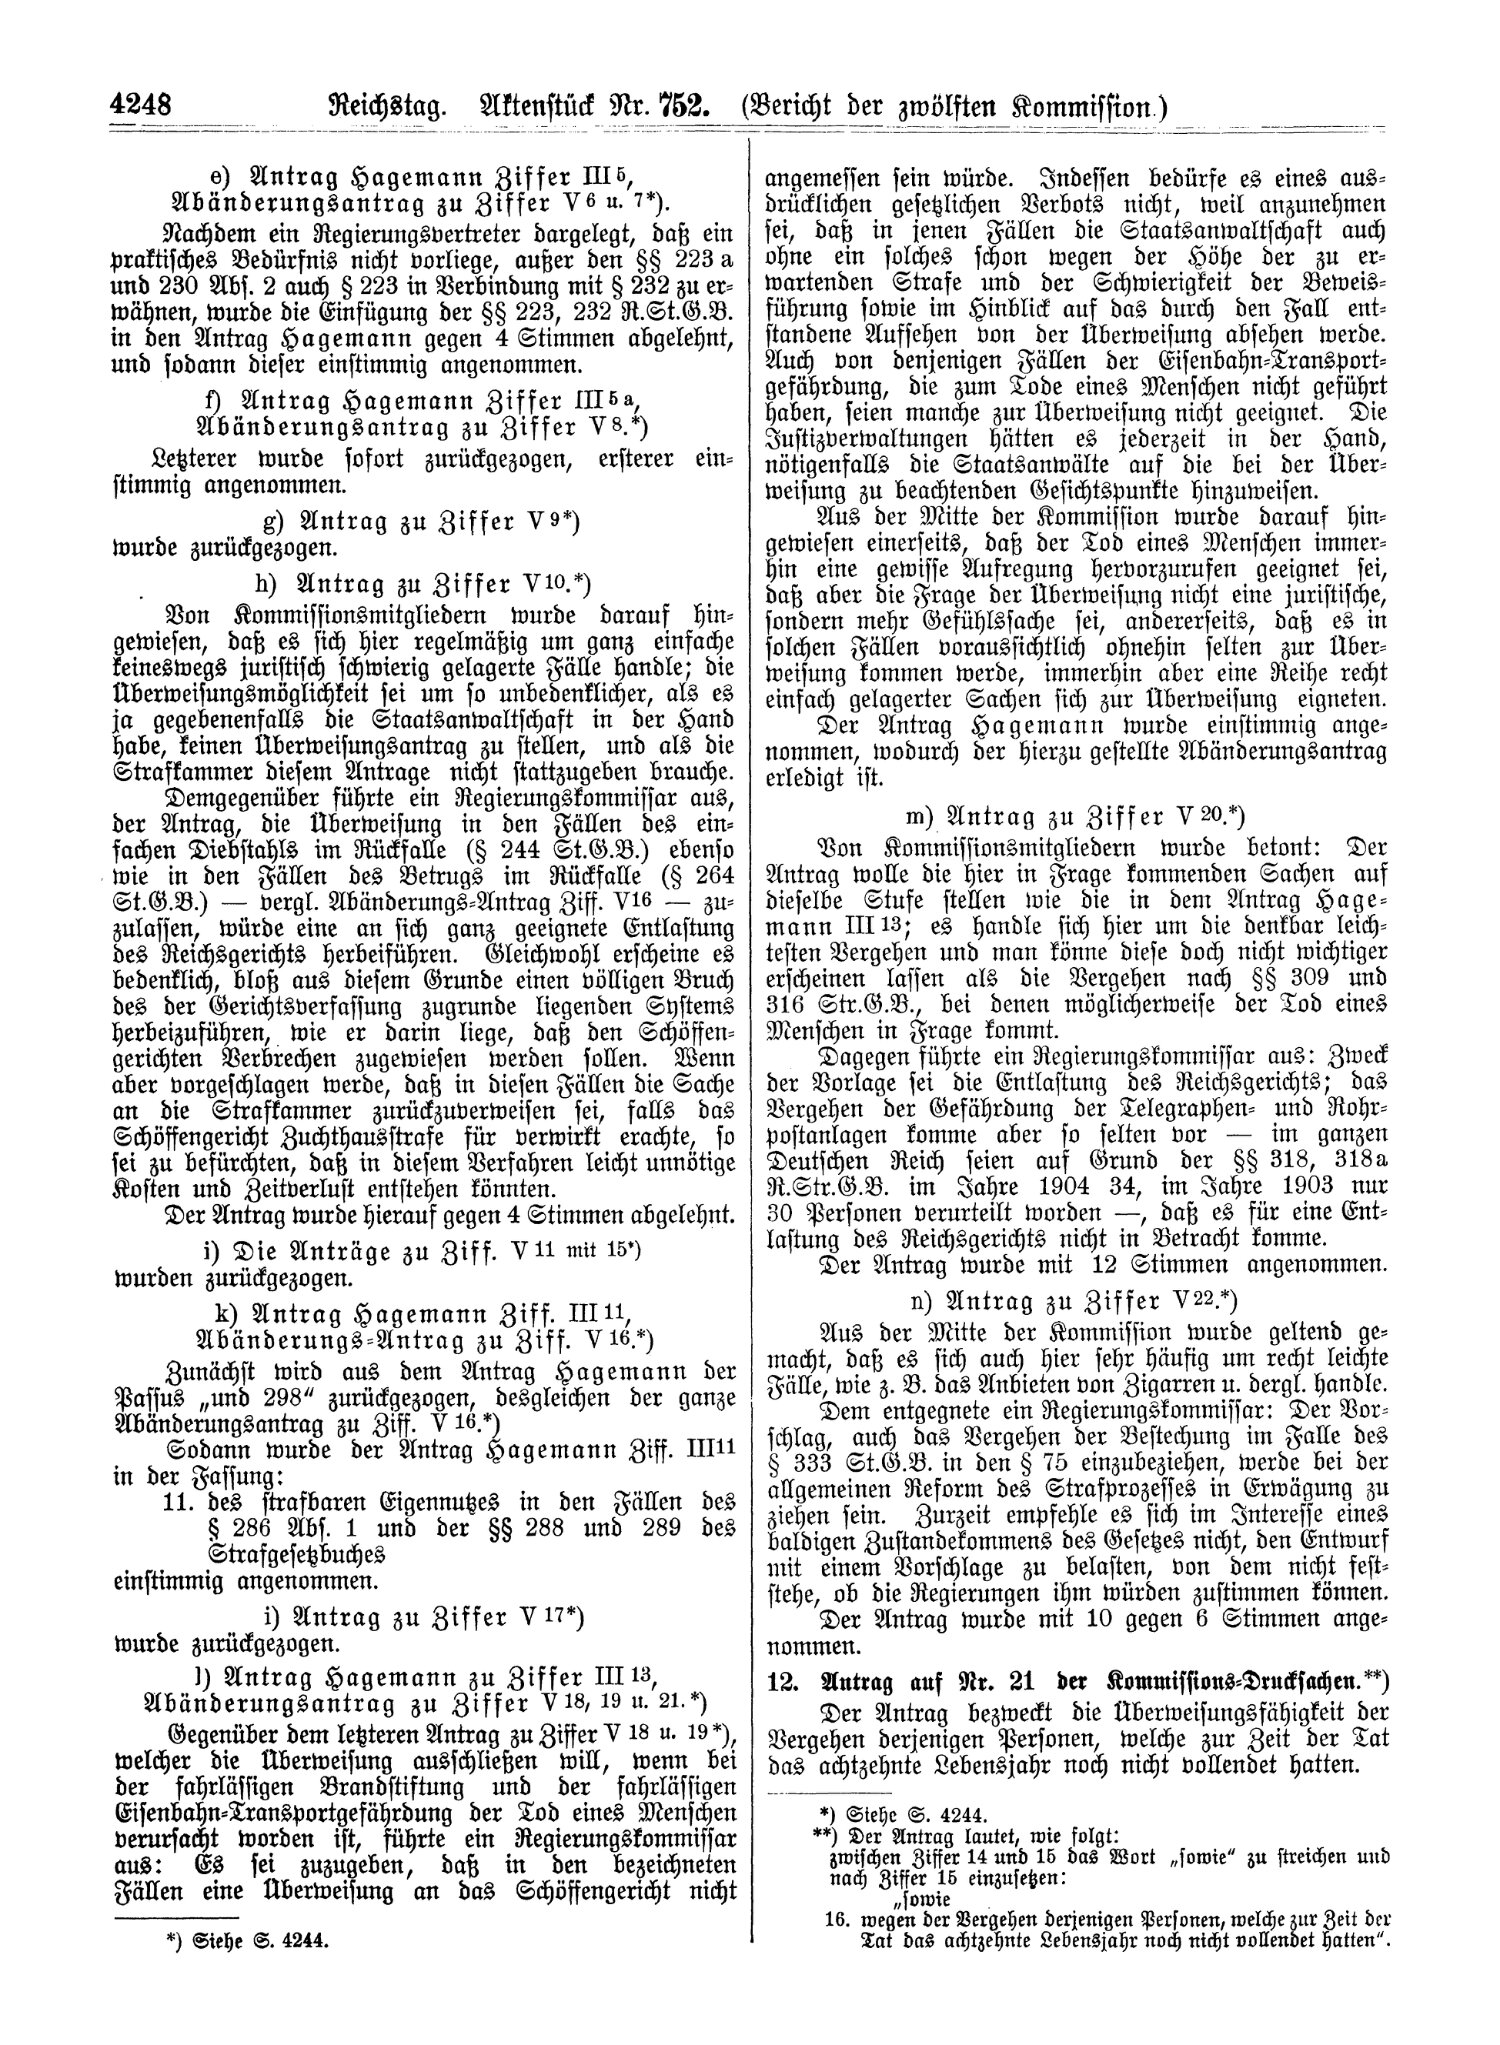 Scan of page 4248